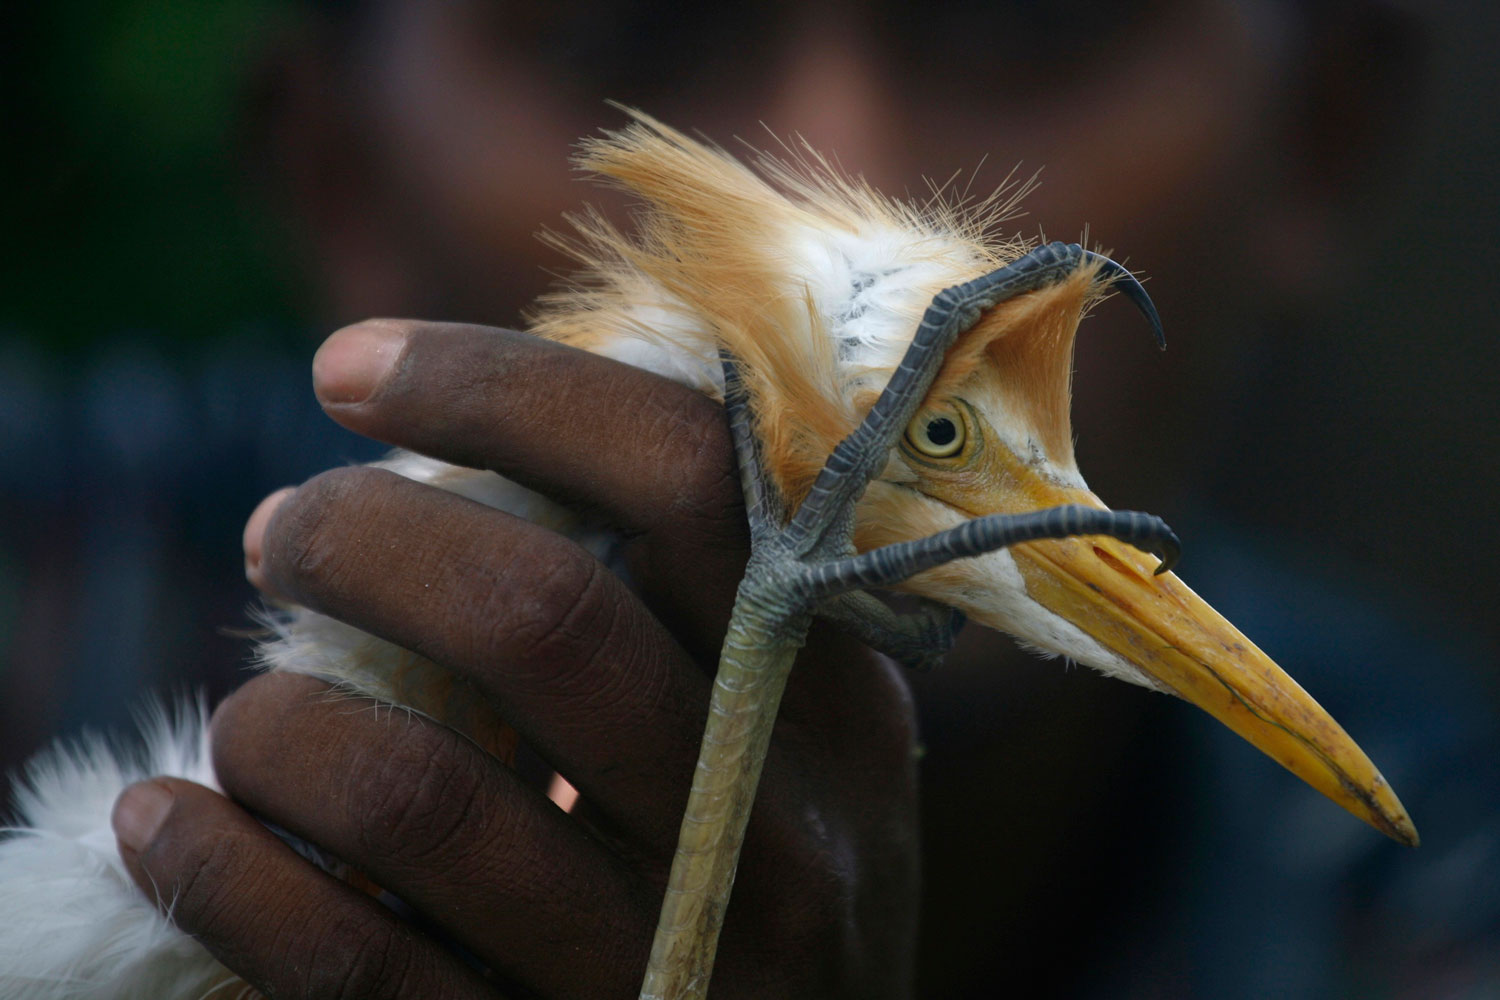 A man displays a crane that he caught from a pond in Noida, located in the northern Indian state of Uttar Pradesh, July 13, 2011.